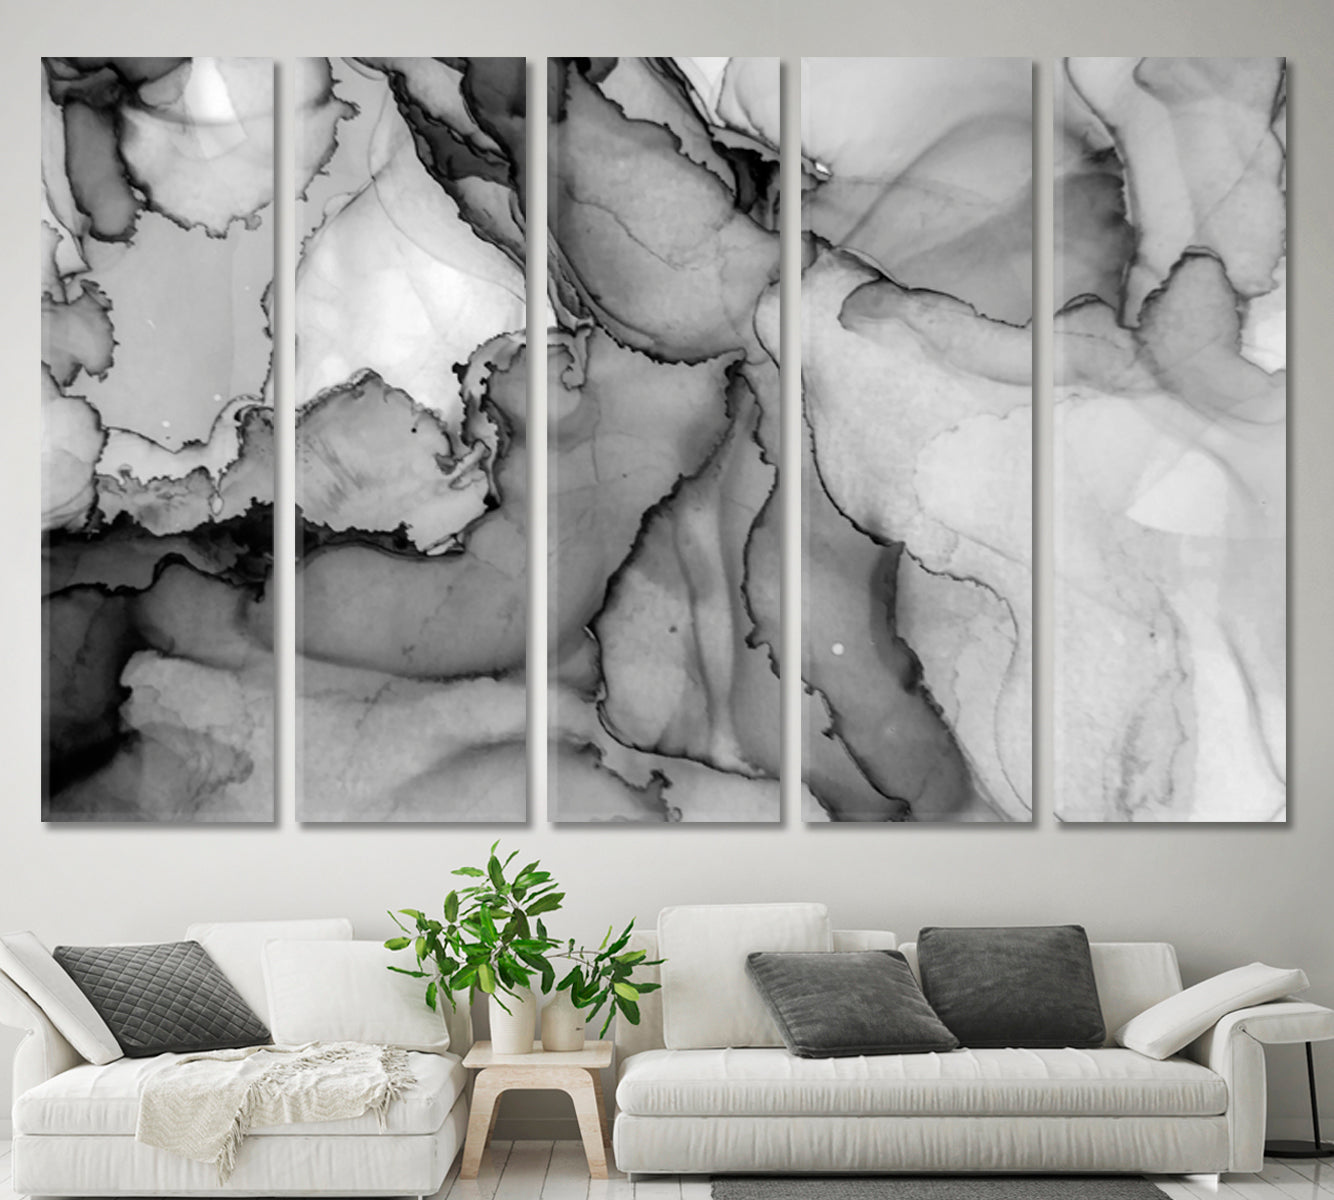 Smoky B & W Alcohol Ink Painting Transparent Marble Artistic Fluid Art, Oriental Marbling Canvas Print Artesty 5 panels 36" x 24" 